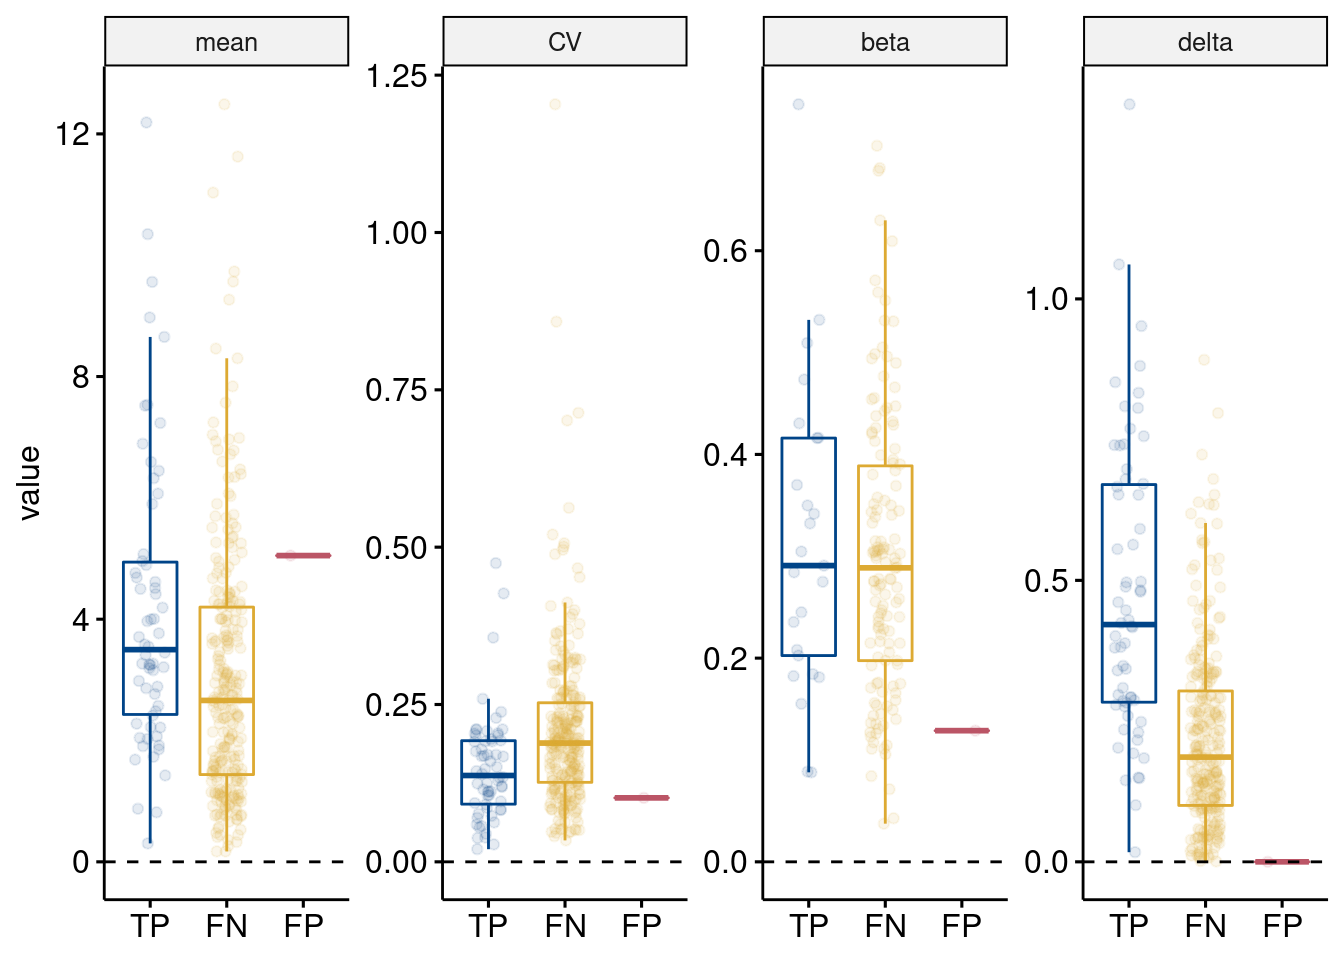 Simulated properties of TP, FN, FP, and TN Wilcoxon rank sum test DE genes. Properties are (left to right) simulated gene mean, gene variance (coefficient of variation), eQTL effect size (beta) if the gene was simulated as an eGene (i.e. zeros, or no eQTL effect, values were removed), and the DE effect size (delta). No delta for FP and TN genes as they were not simulated as DEG. Results from t-tests compared to TP are shown (ns: p > 0.05; $*$: p <= 0.05; $**$: p <= 0.01; $***$: p <= 0.001; $****$: p <= 0.0001)